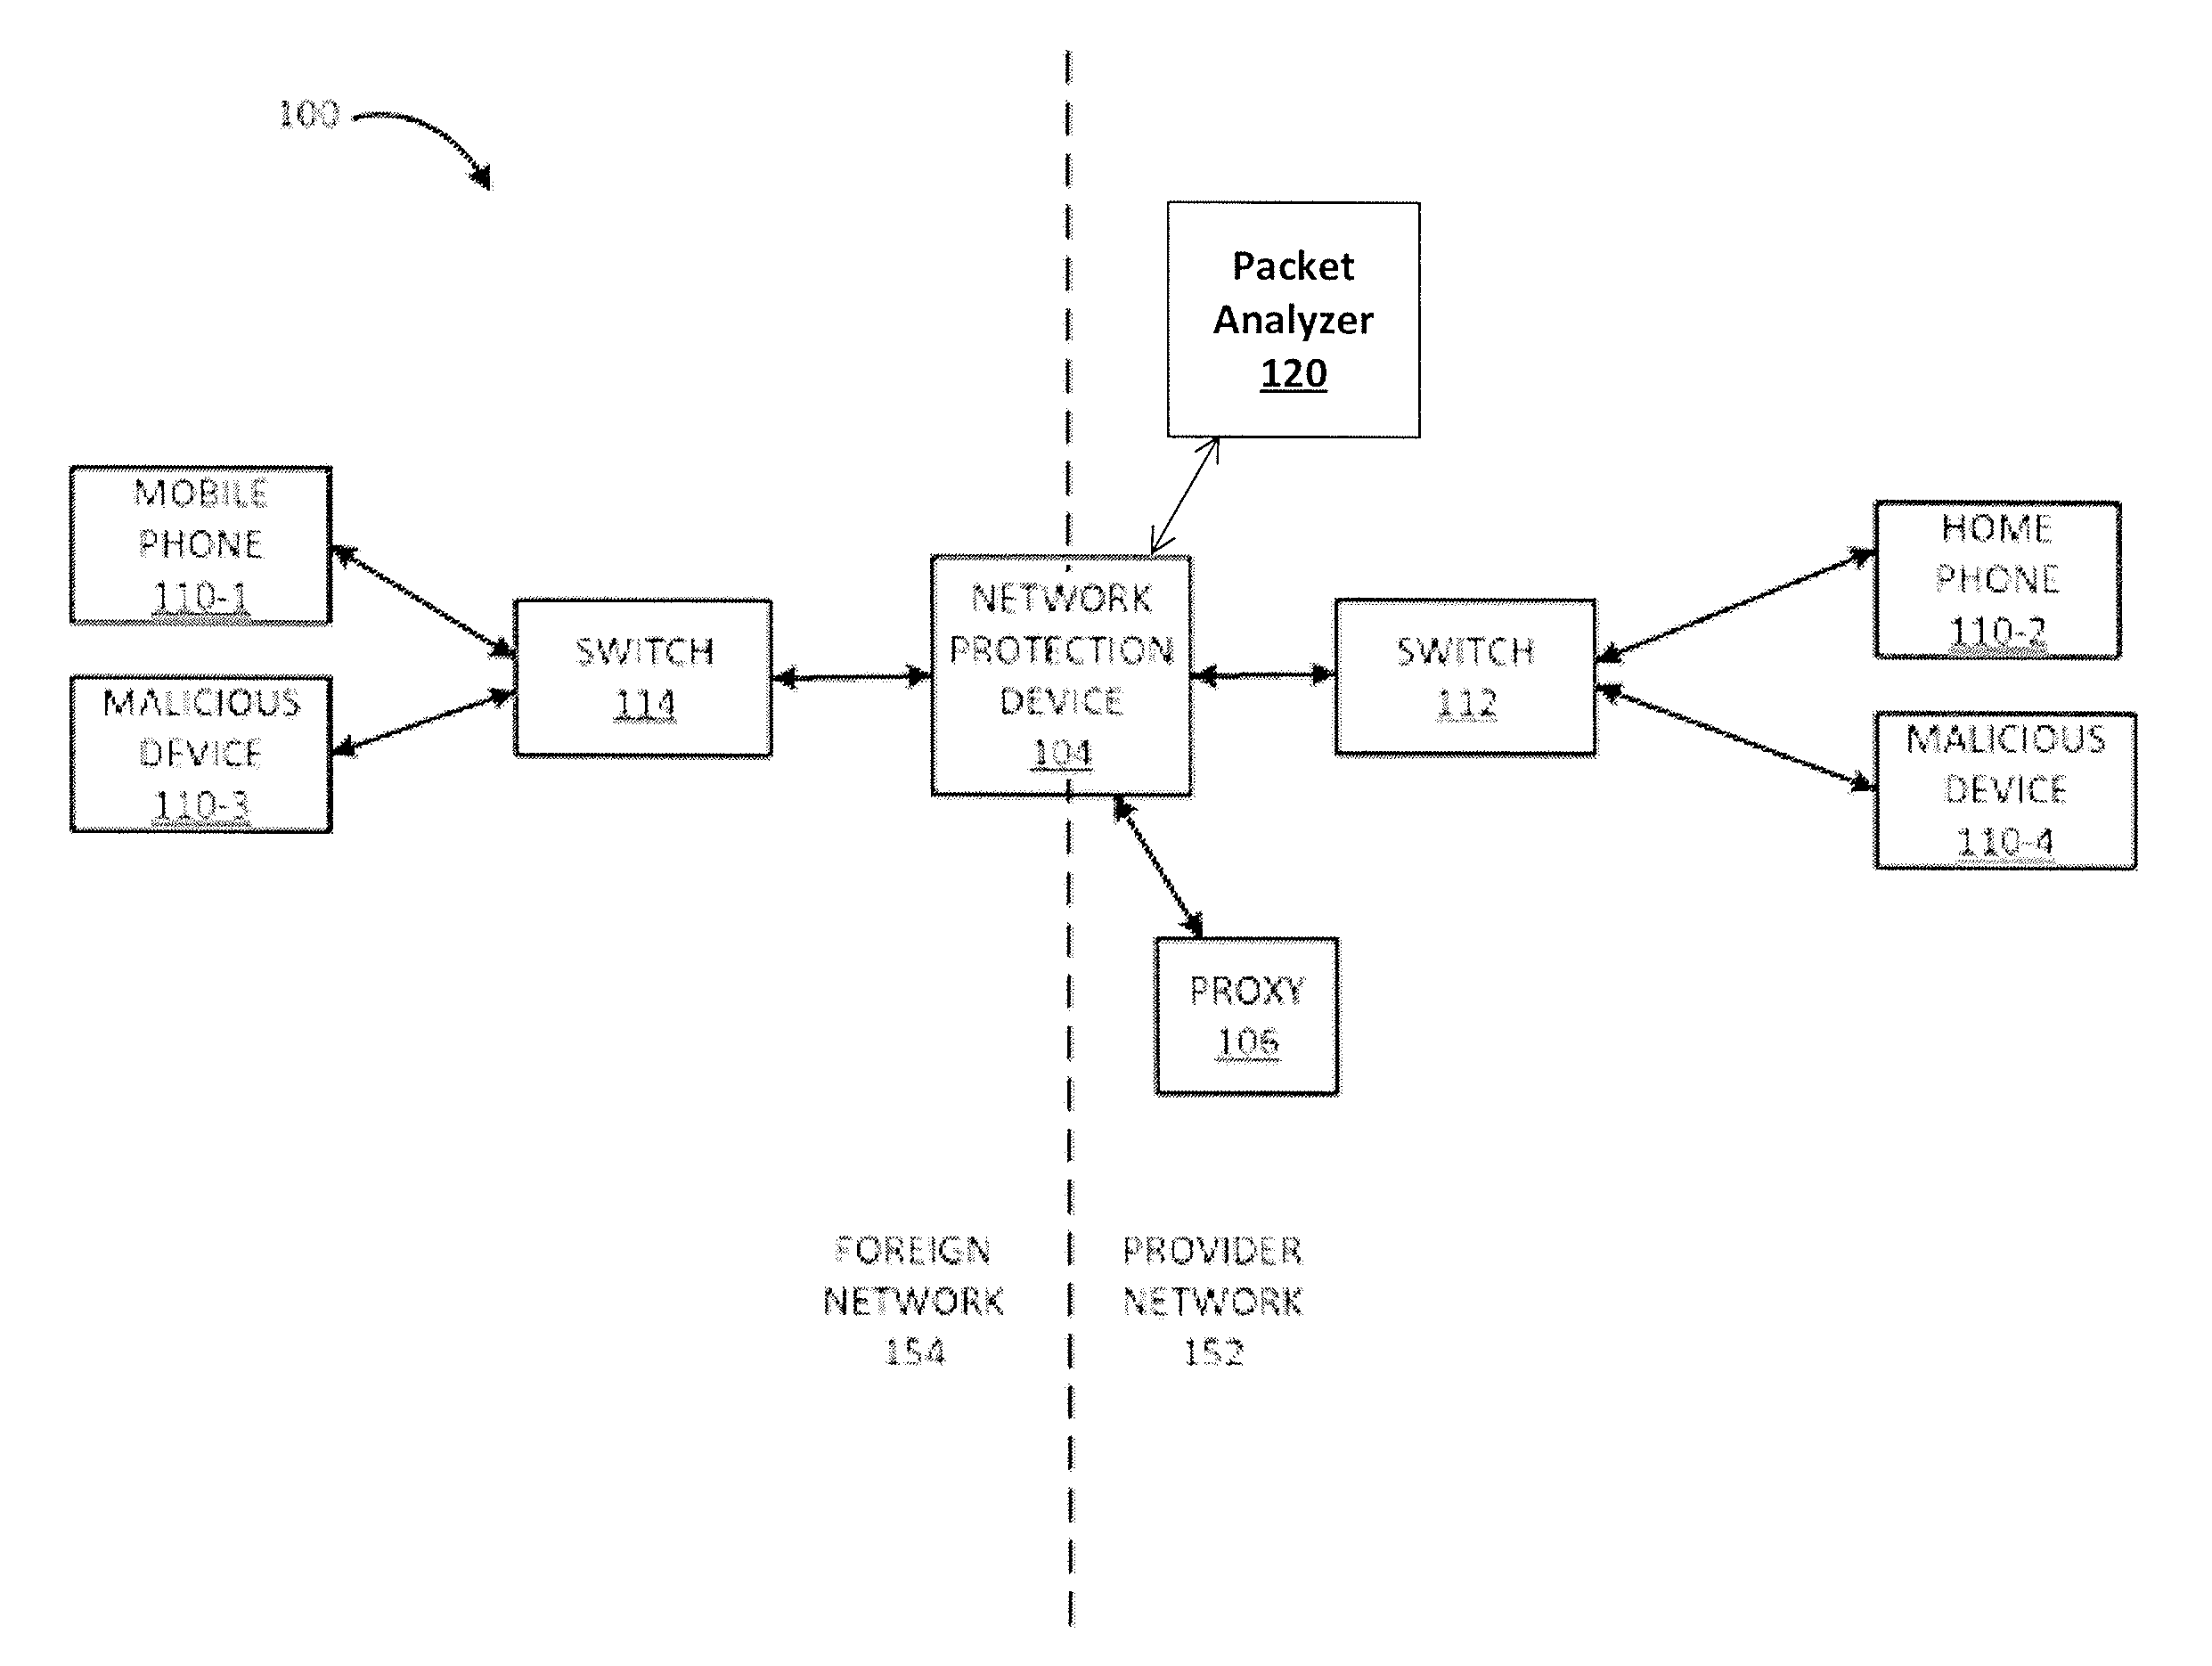 Denial of service (DOS) attack detection systems and methods